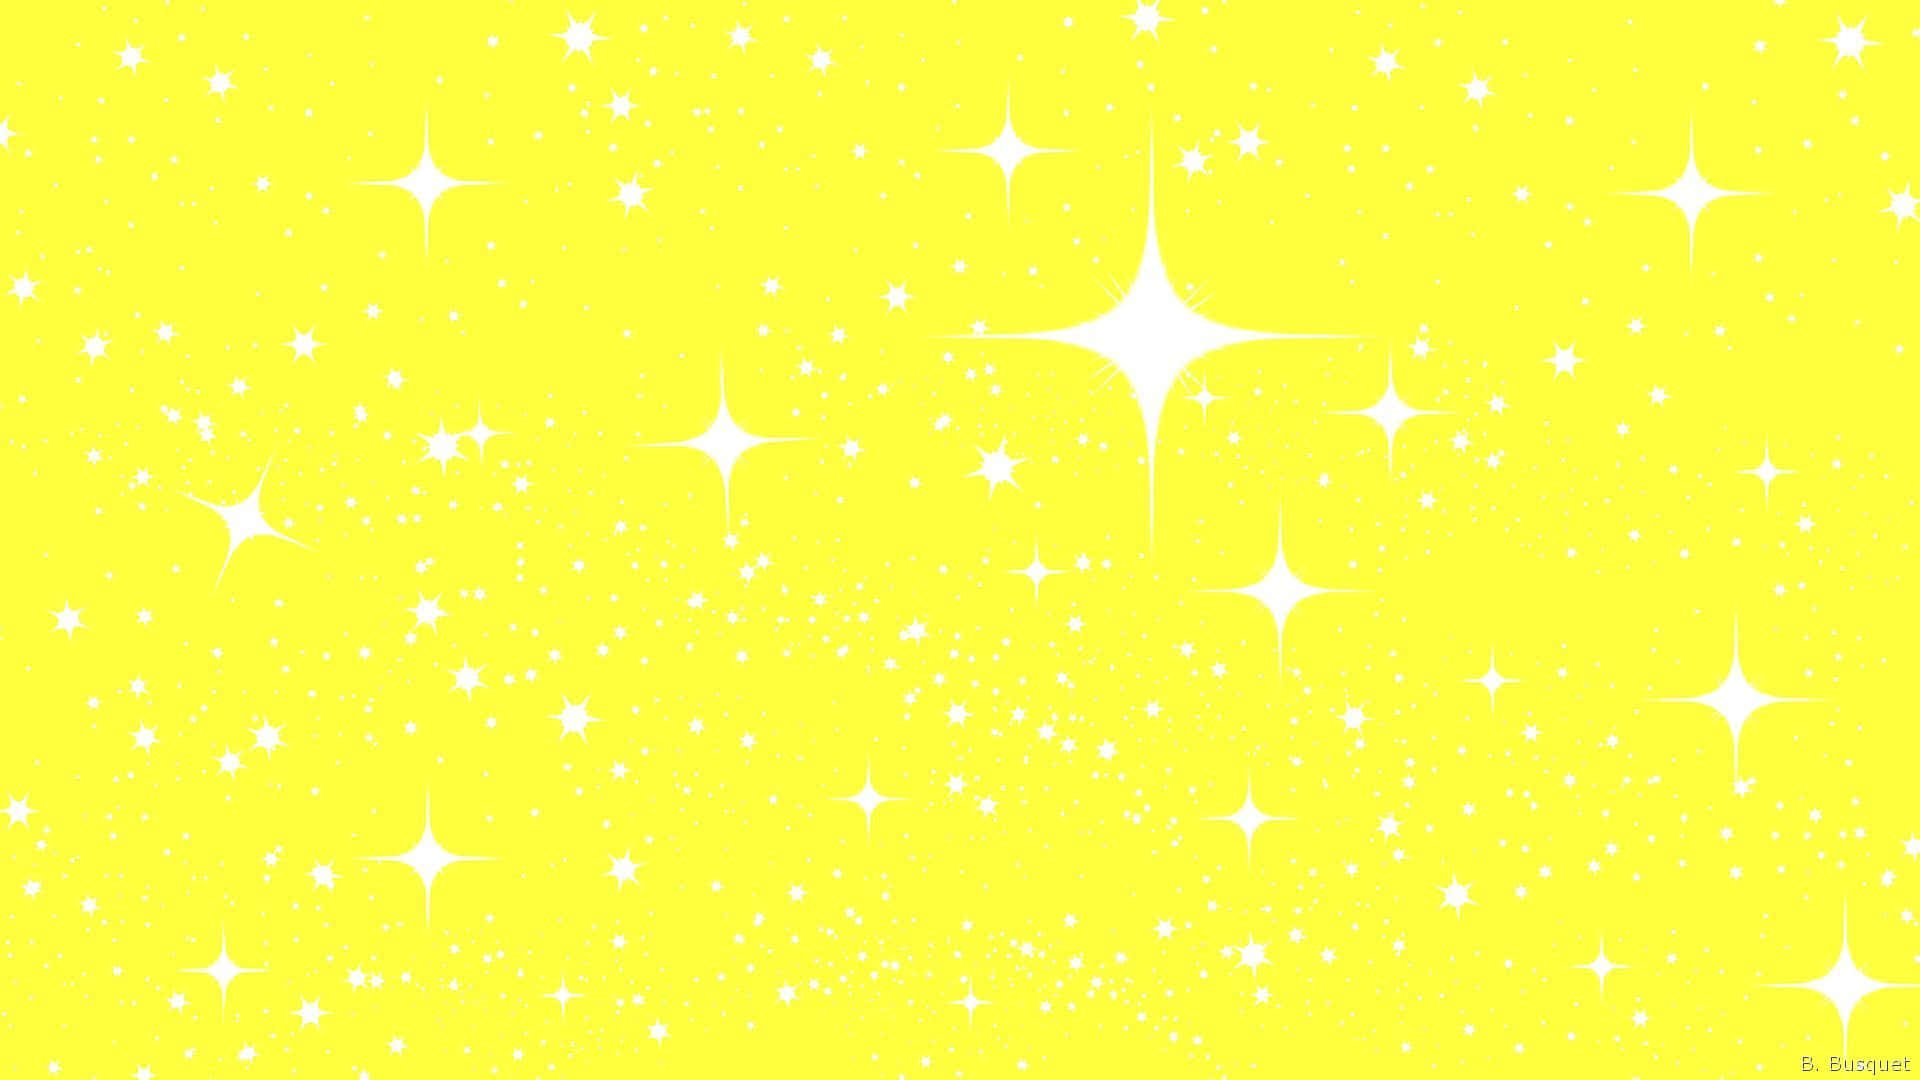 A Yellow Background With Stars And White Stars Wallpaper